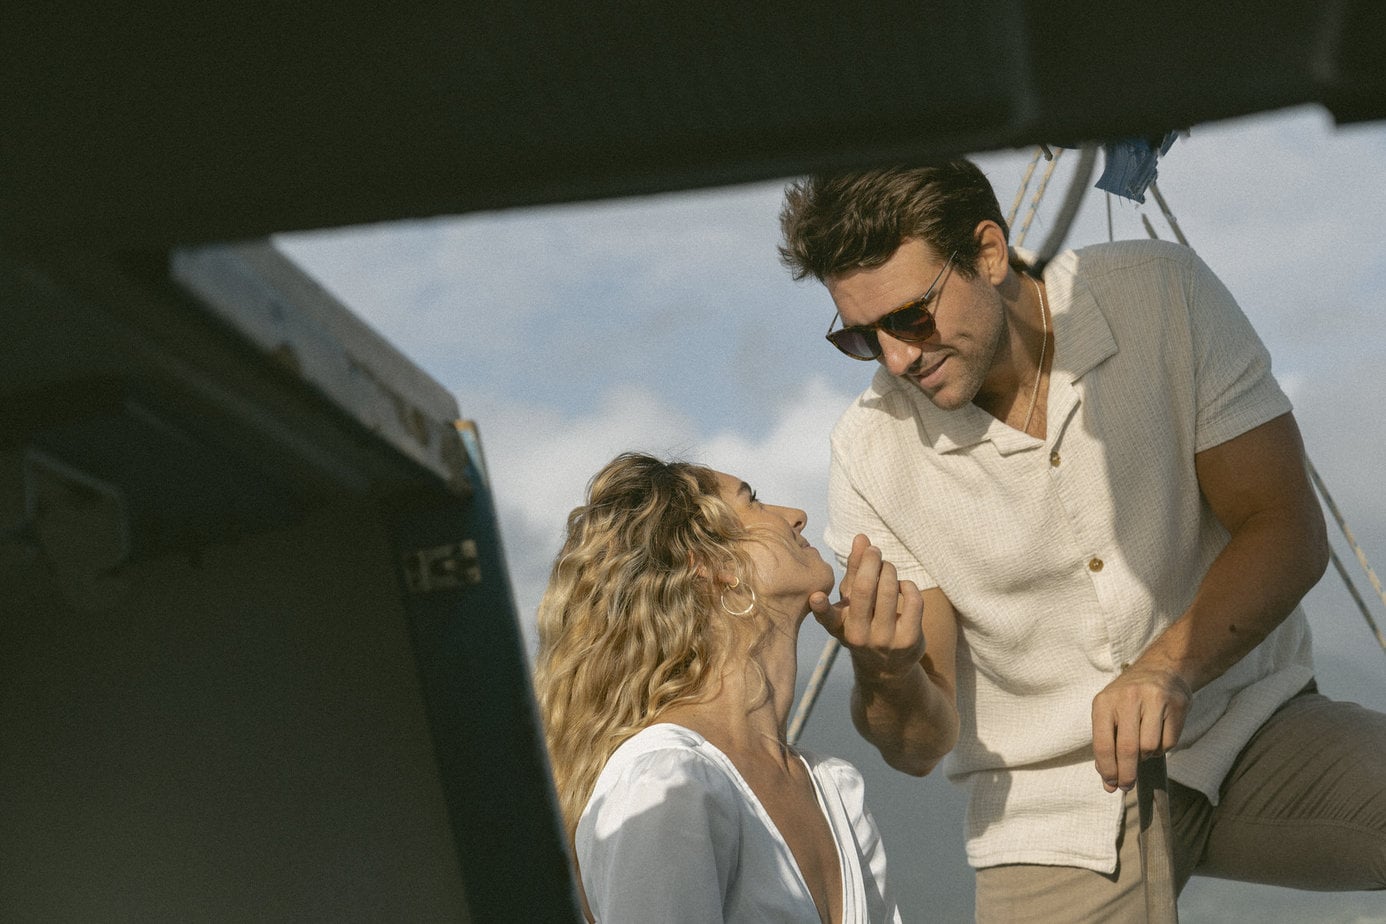 Couple playfully interacting during boat engagement session.